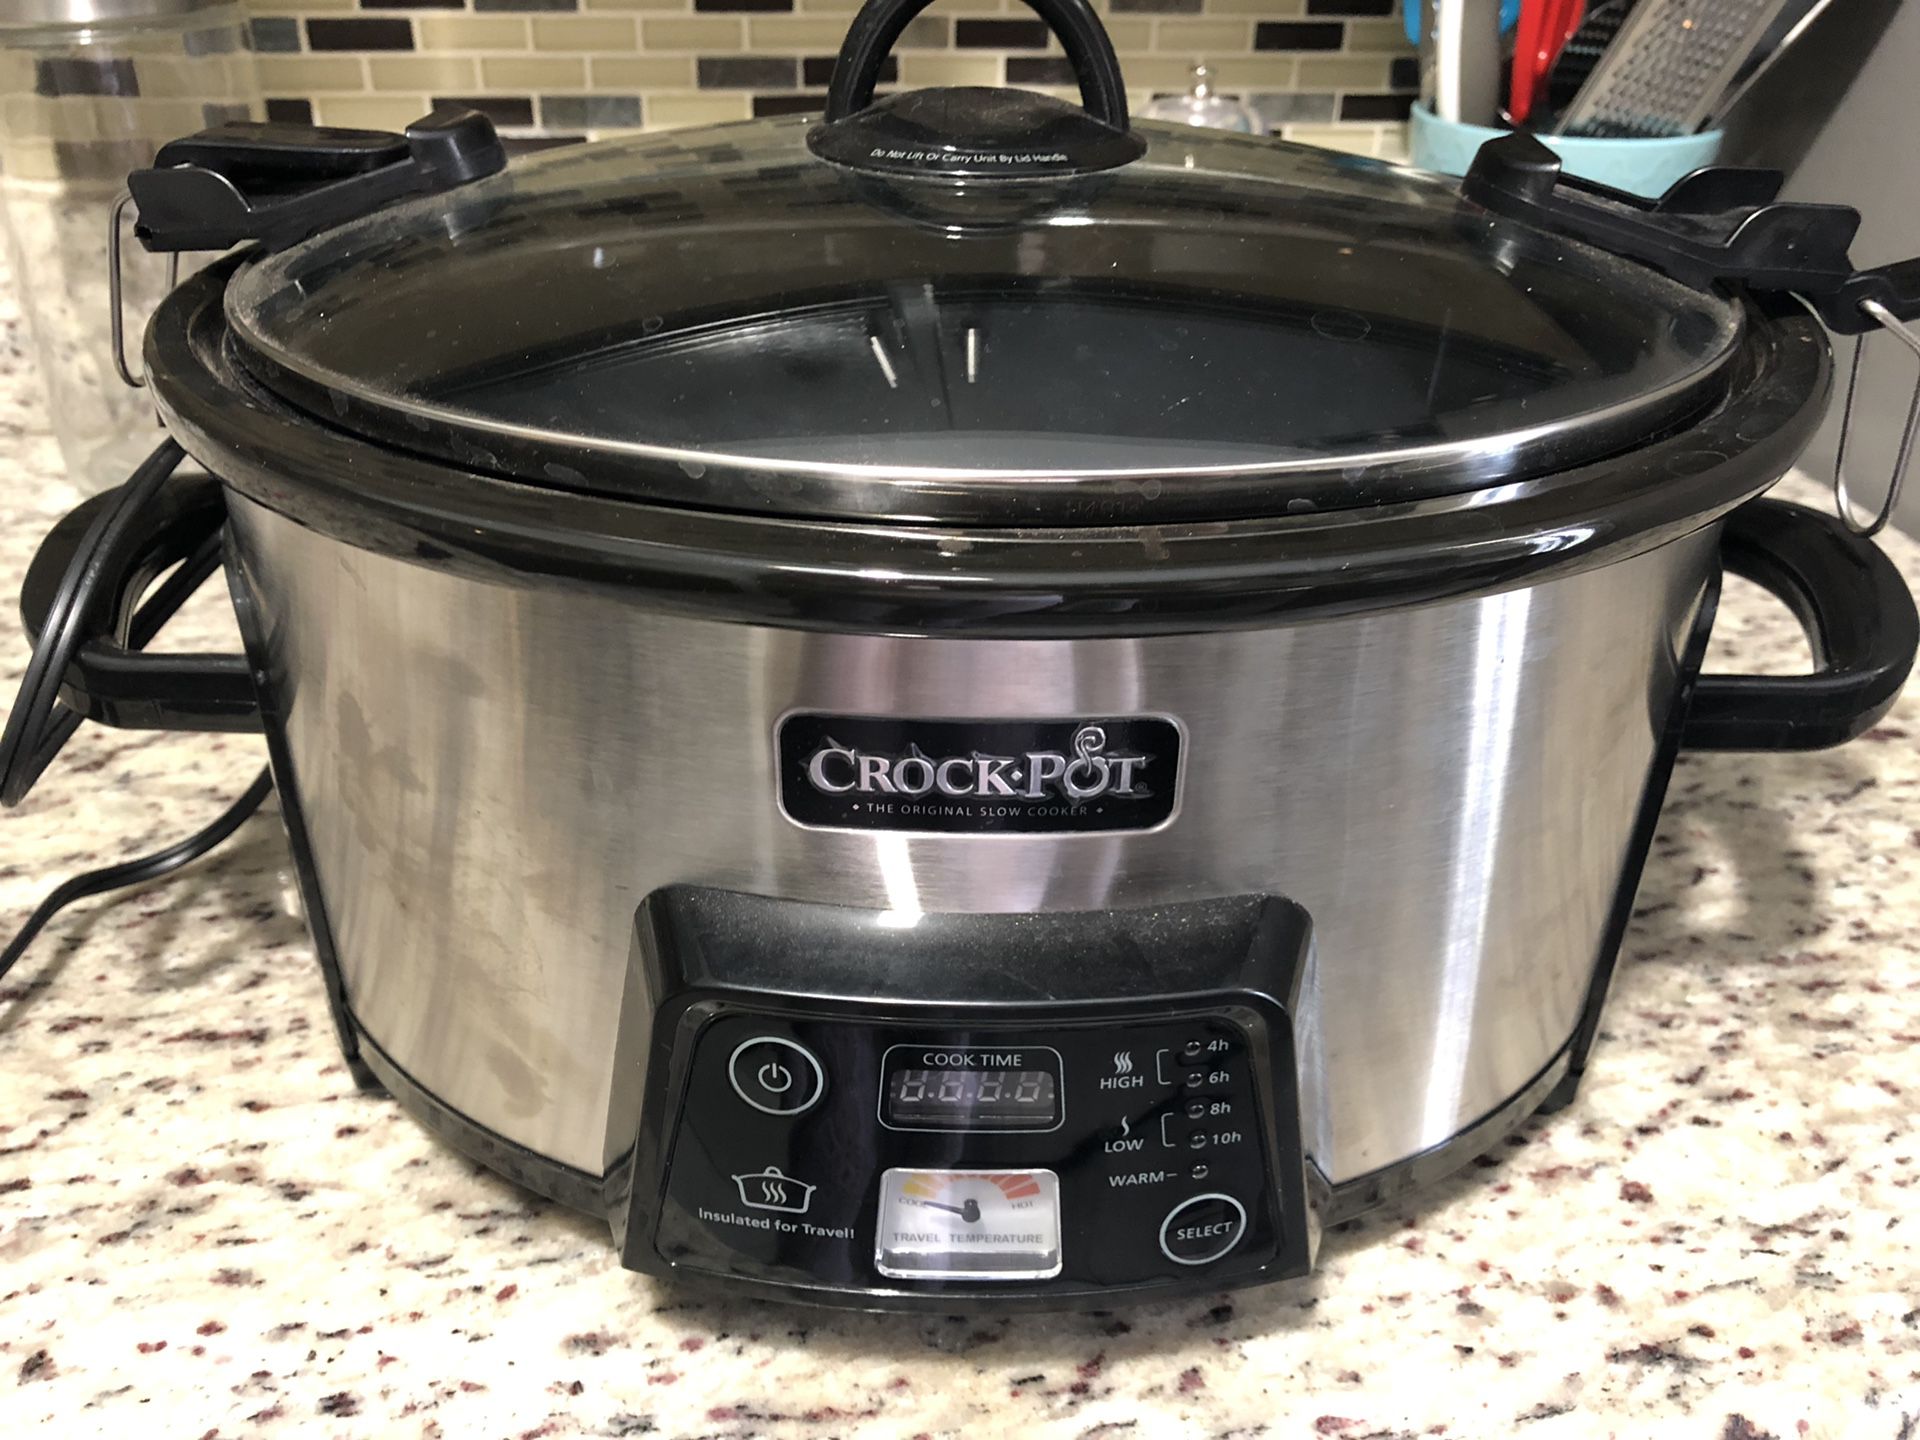 Barely used crock pot